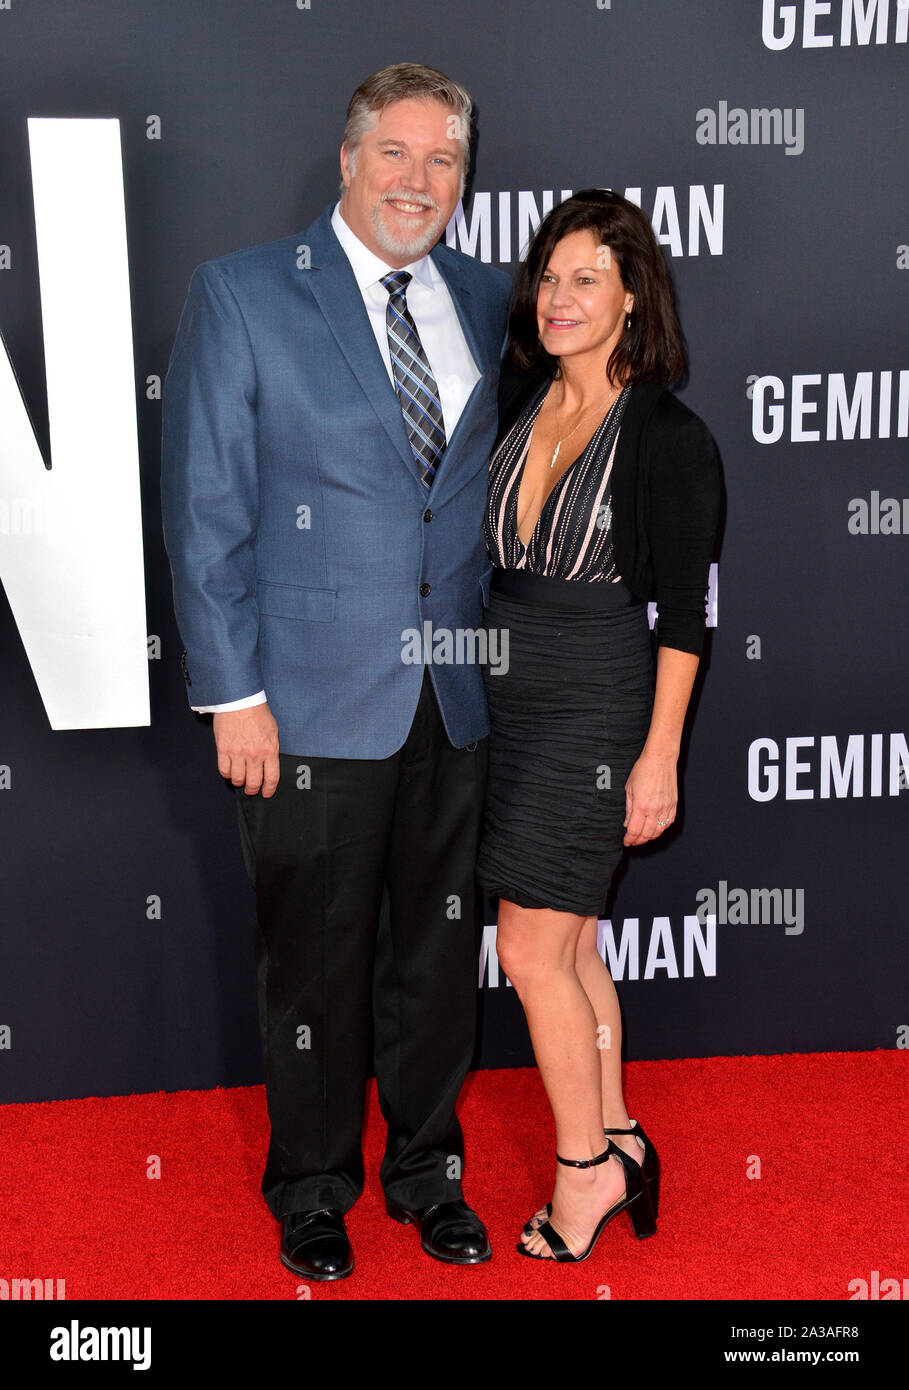 LOS ANGELES, USA. October 07, 2019: Bill Westenhofer & Guest at the premiere of 'Gemini Man' at the TCL Chinese Theatre, Hollywood. Picture: Paul Smith/Featureflash Credit: Paul Smith/Alamy Live News Stock Photo